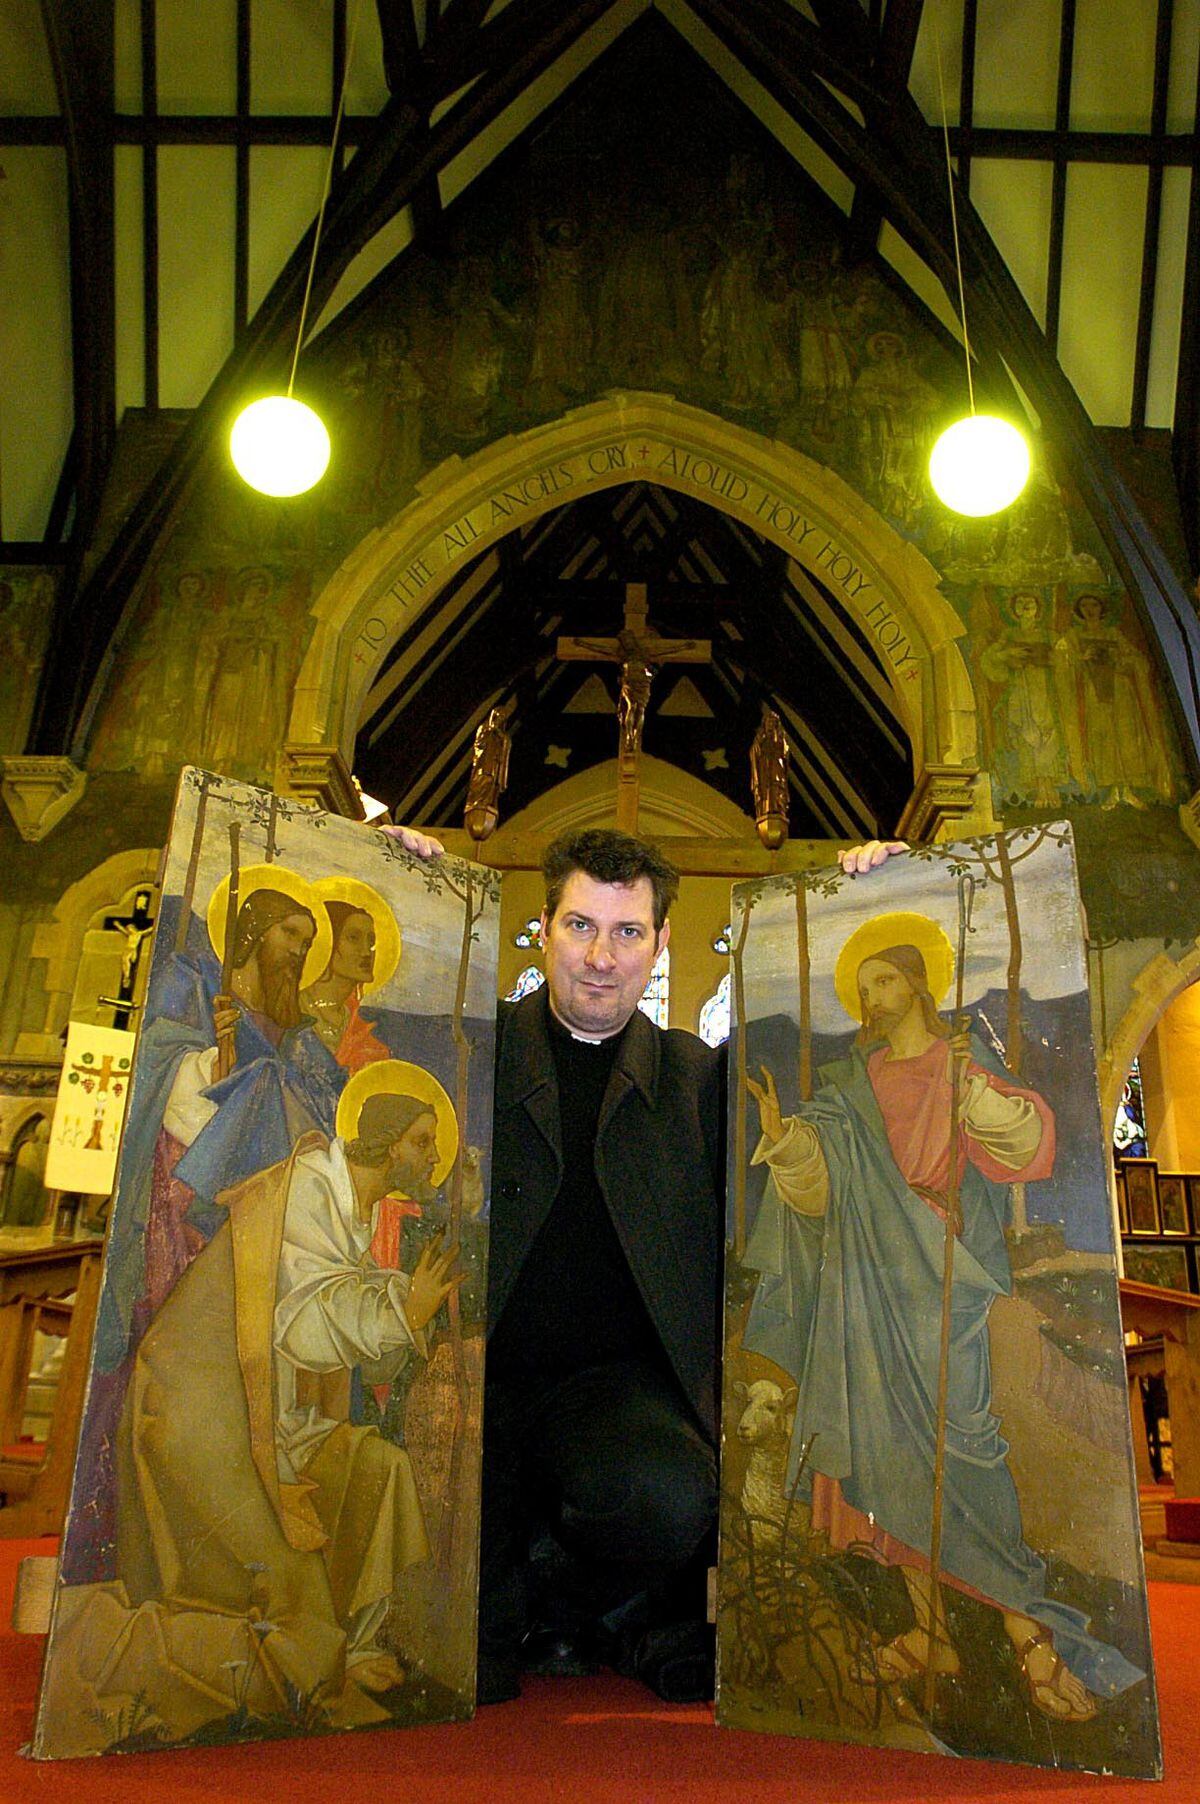 The Reverend Colin Tel at Rushall Parish Church who has launched a major fundraising campaign to restore all of the historic murals